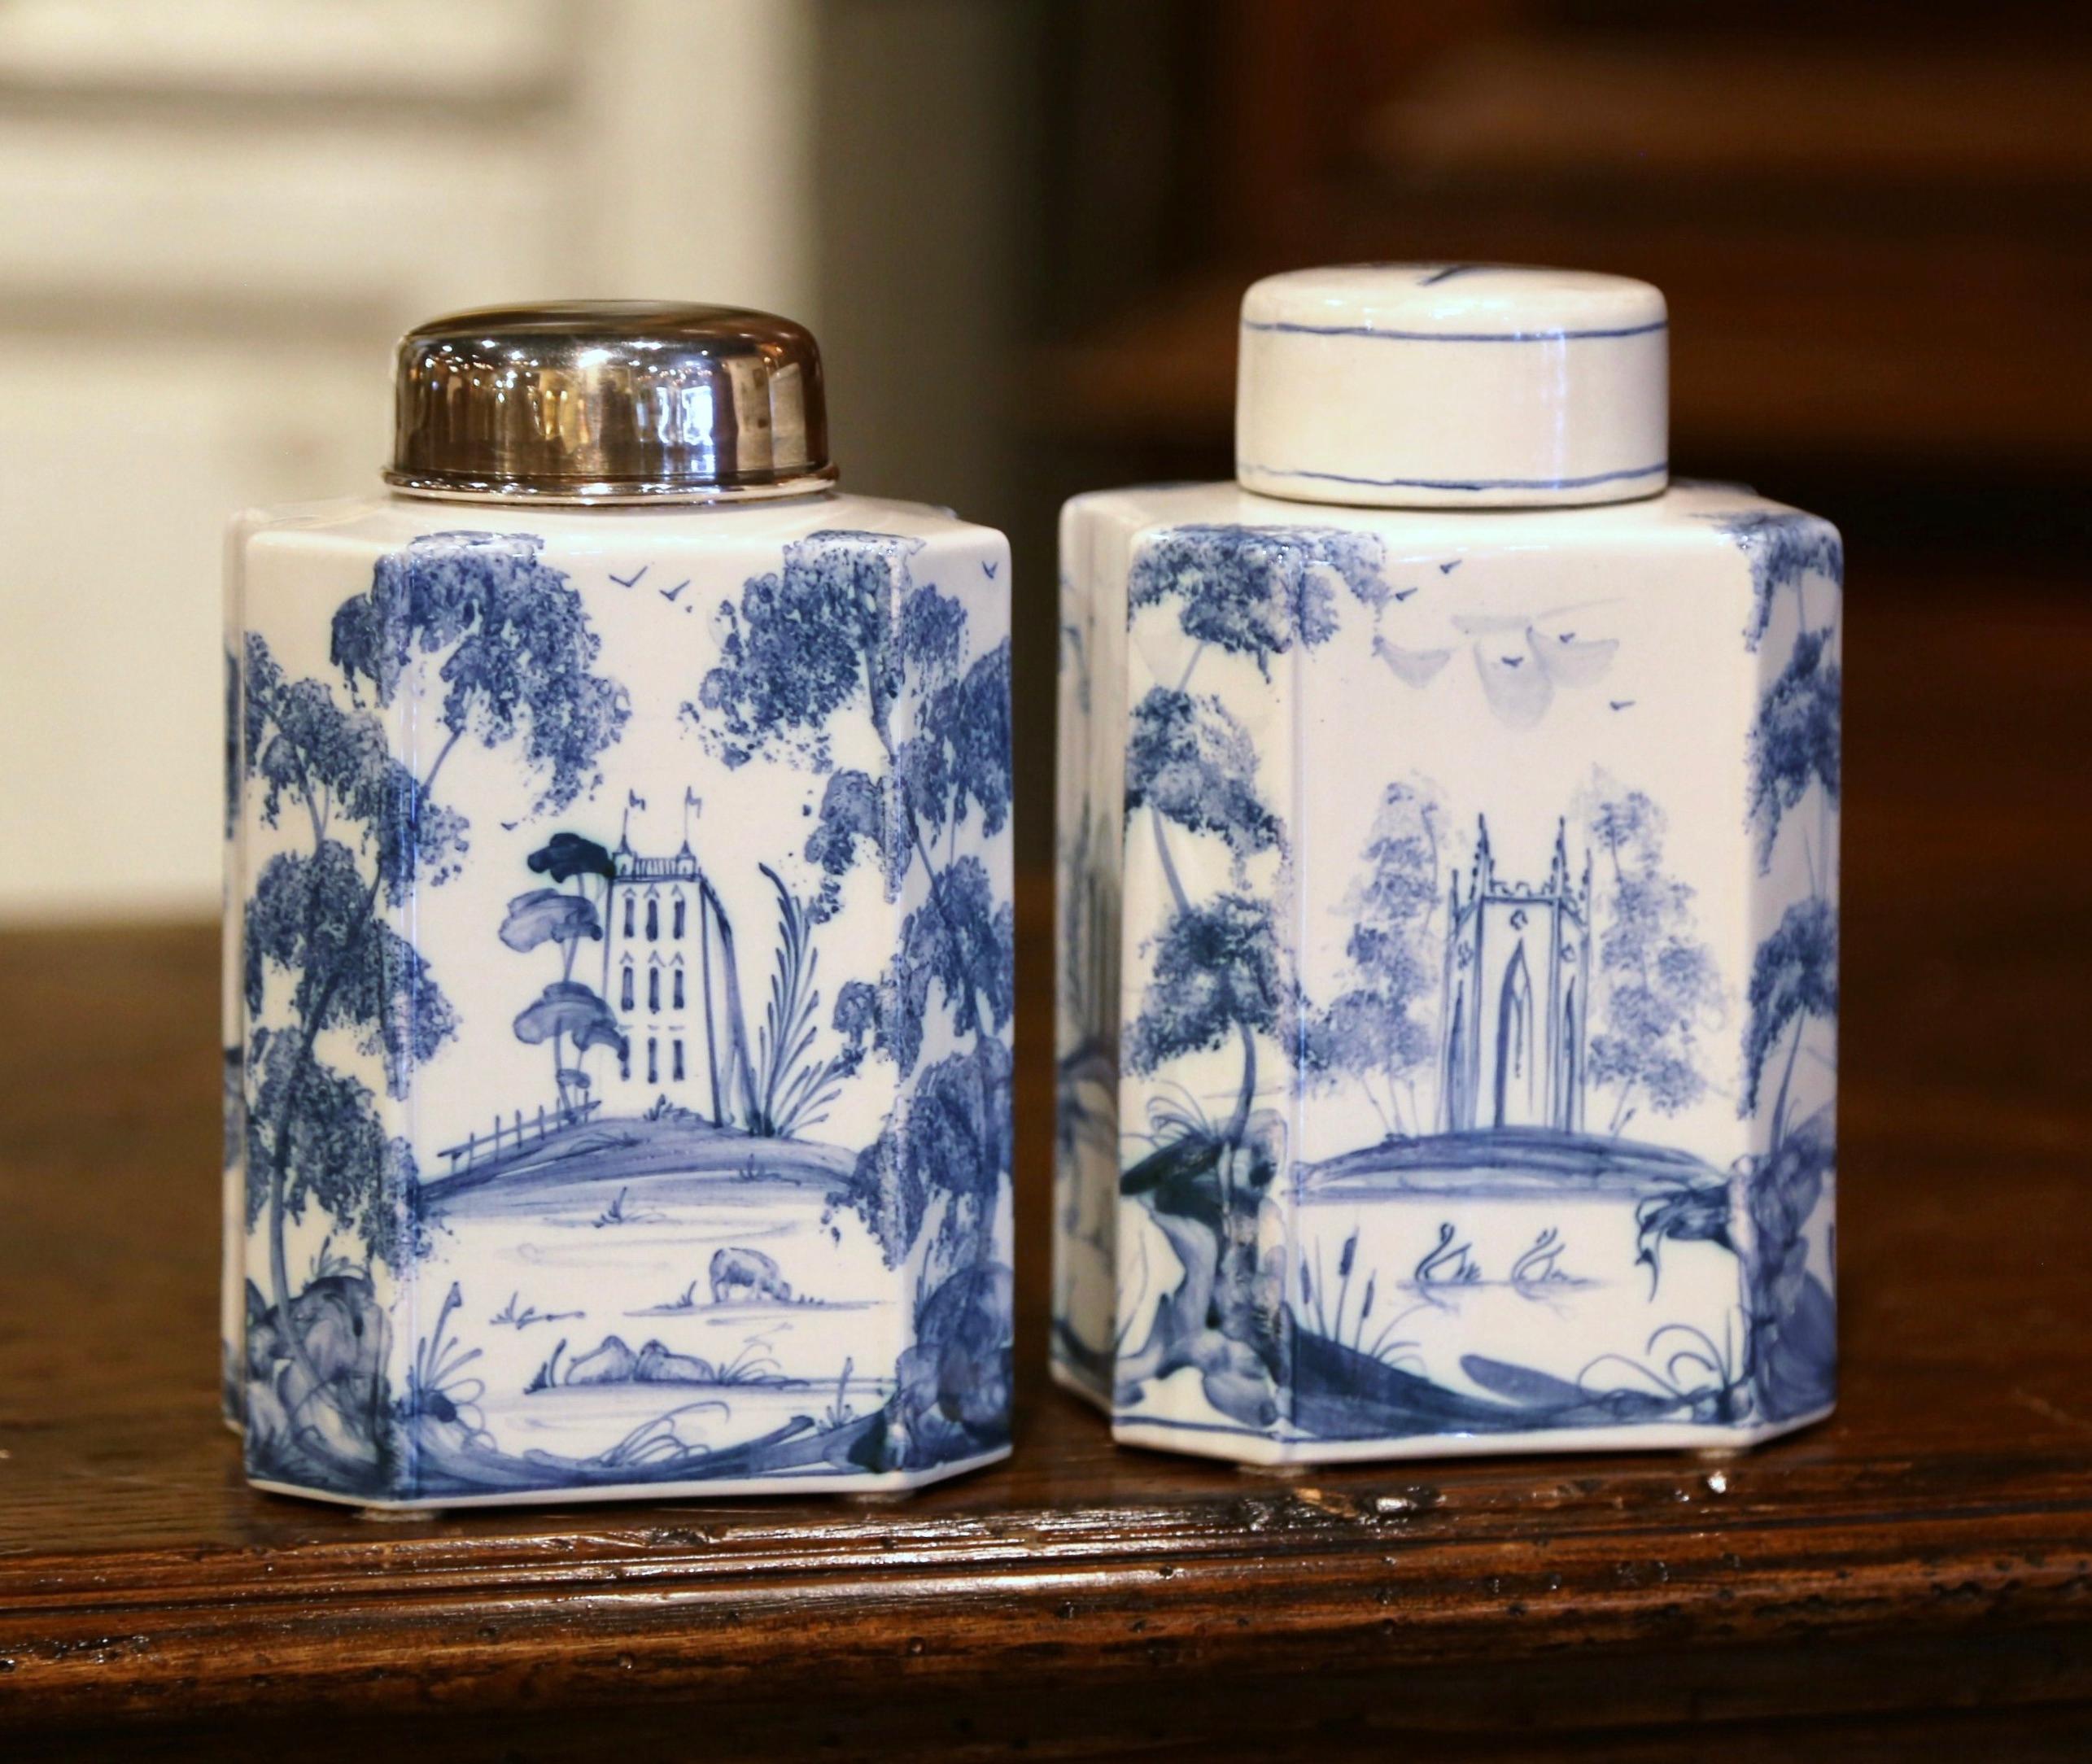 Crafted in Oxford, England circa 1980, each faience jar is hand painted with pastoral motifs in the traditional Delft blue and white palette. One jar has a metal lid, while the other is dressed with a ceramic top. The colorful jars are in excellent